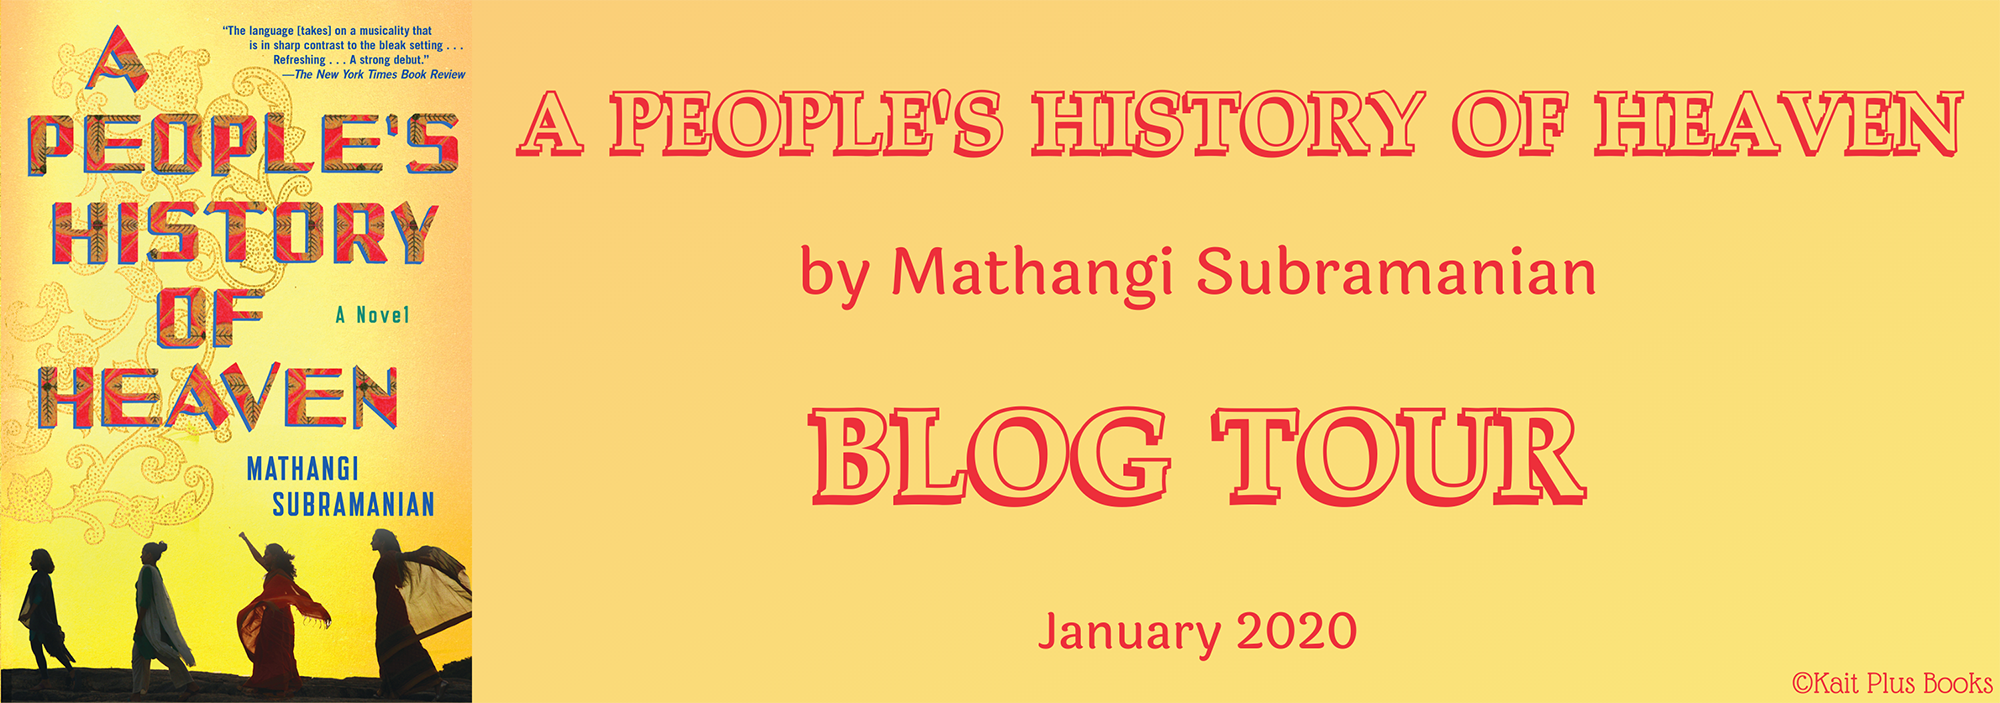 Blog Tour: A People's History of Heaven by Mathangi Subramanian (Spotlight!)